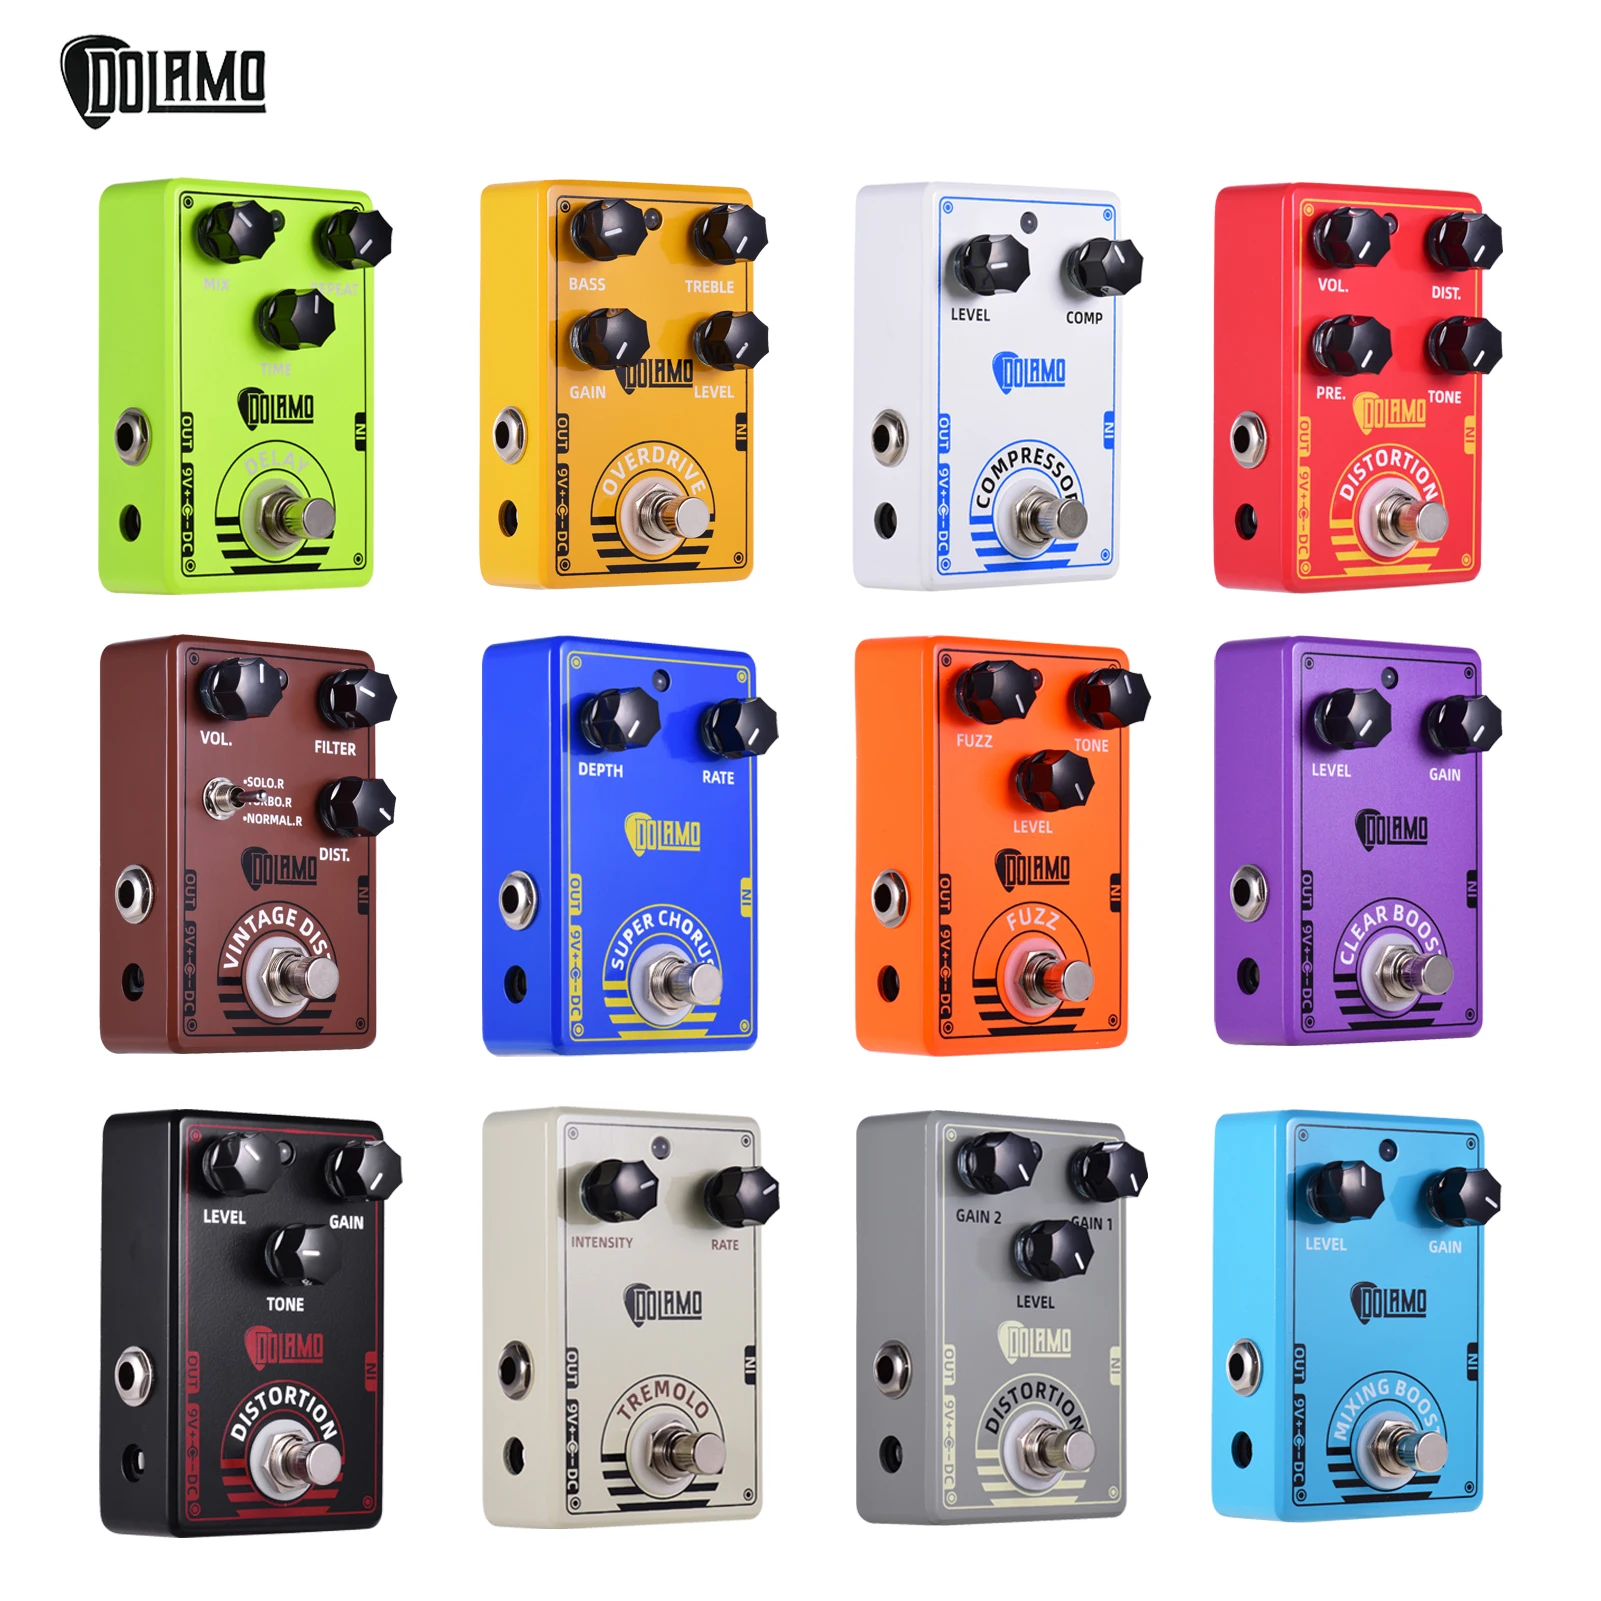 

Dolamo Series Guitar Pedal Chubby Comp Delay Pedal Compressor Electric Guitar Effect Pedal with True Bypass guitar accessories